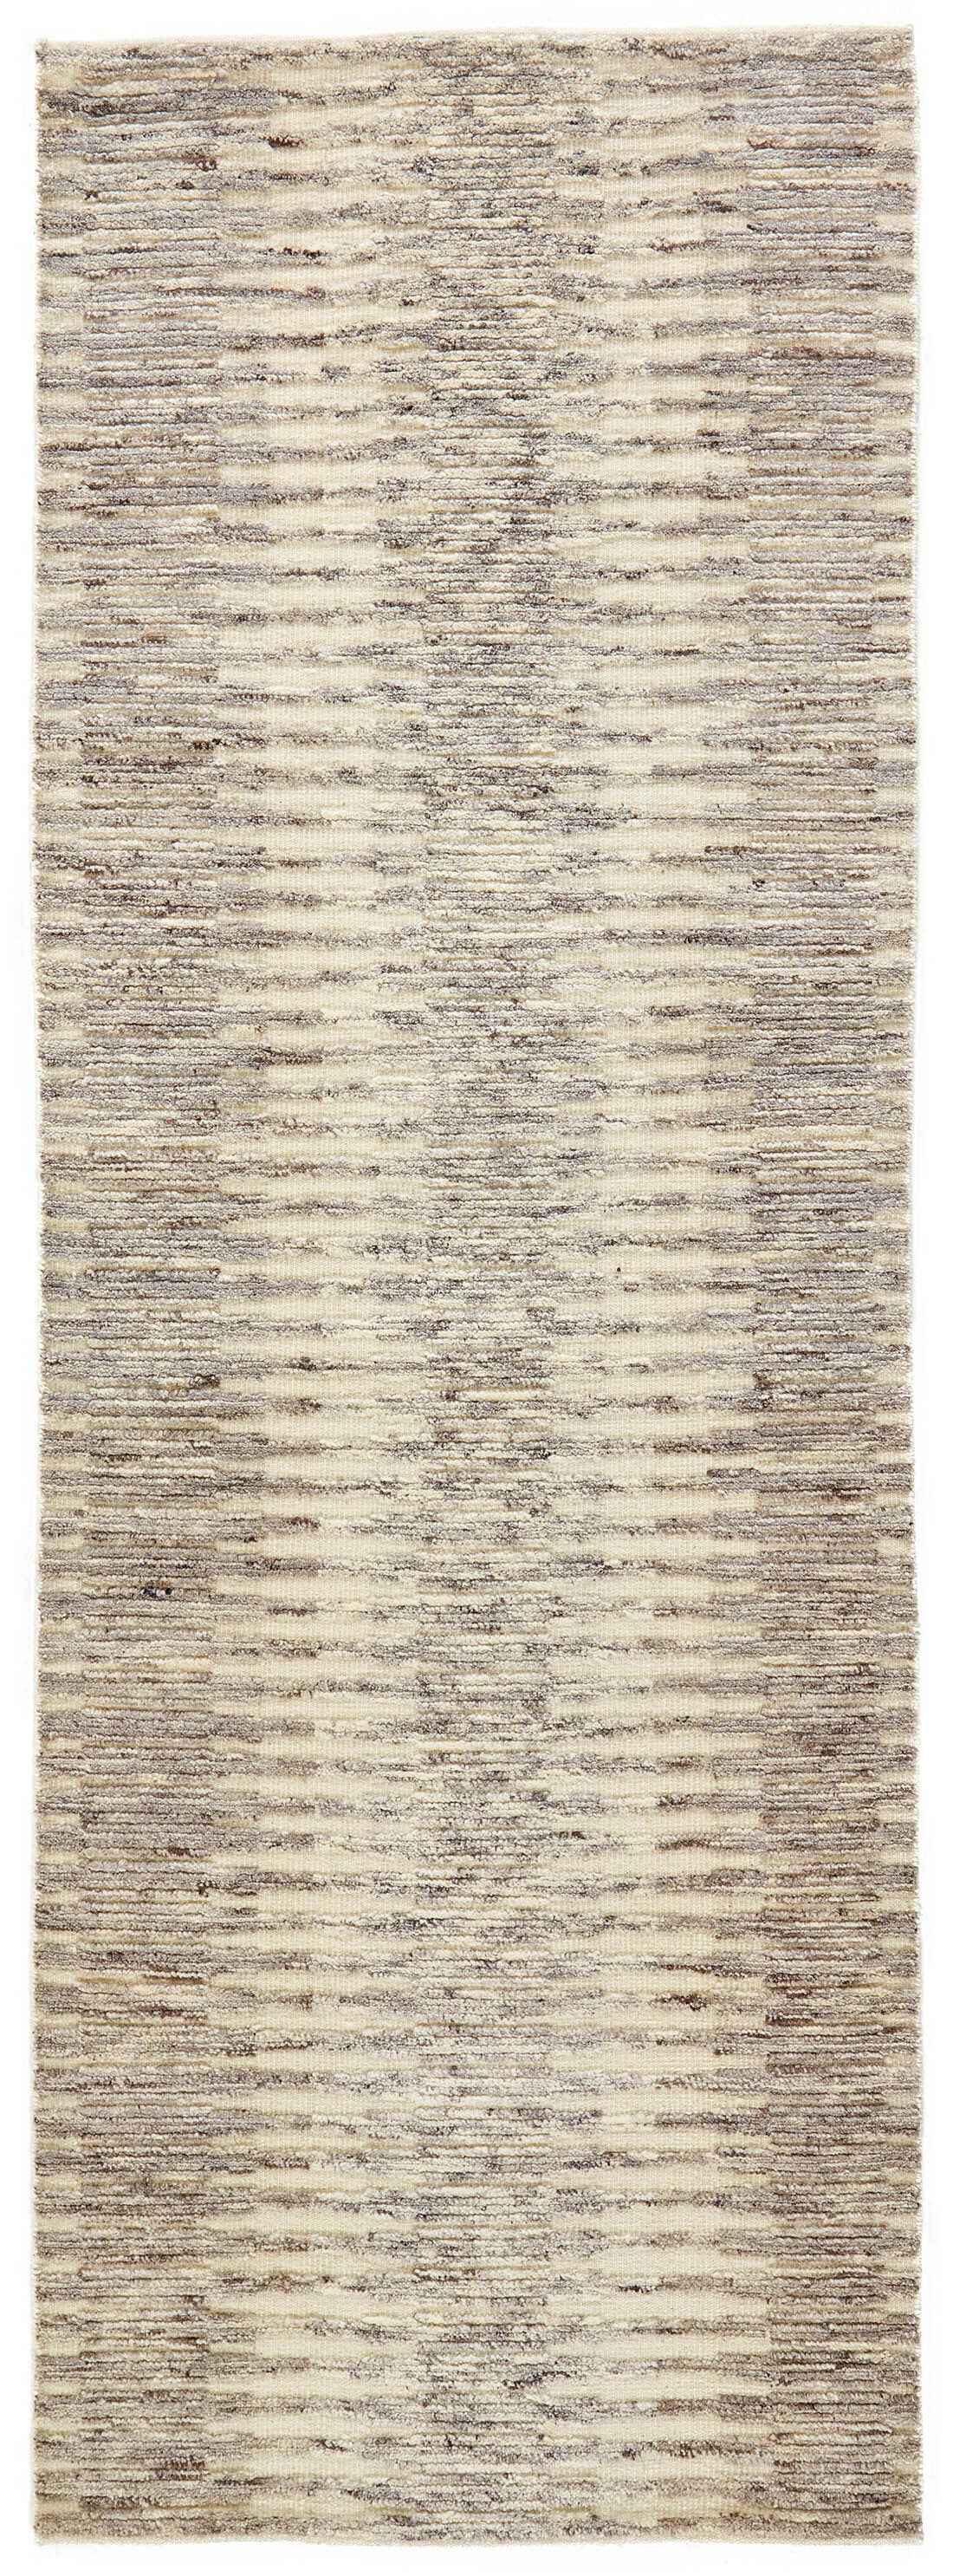 300x85 cm  Indian Wool Beige Rug-Cliff, Charcoal